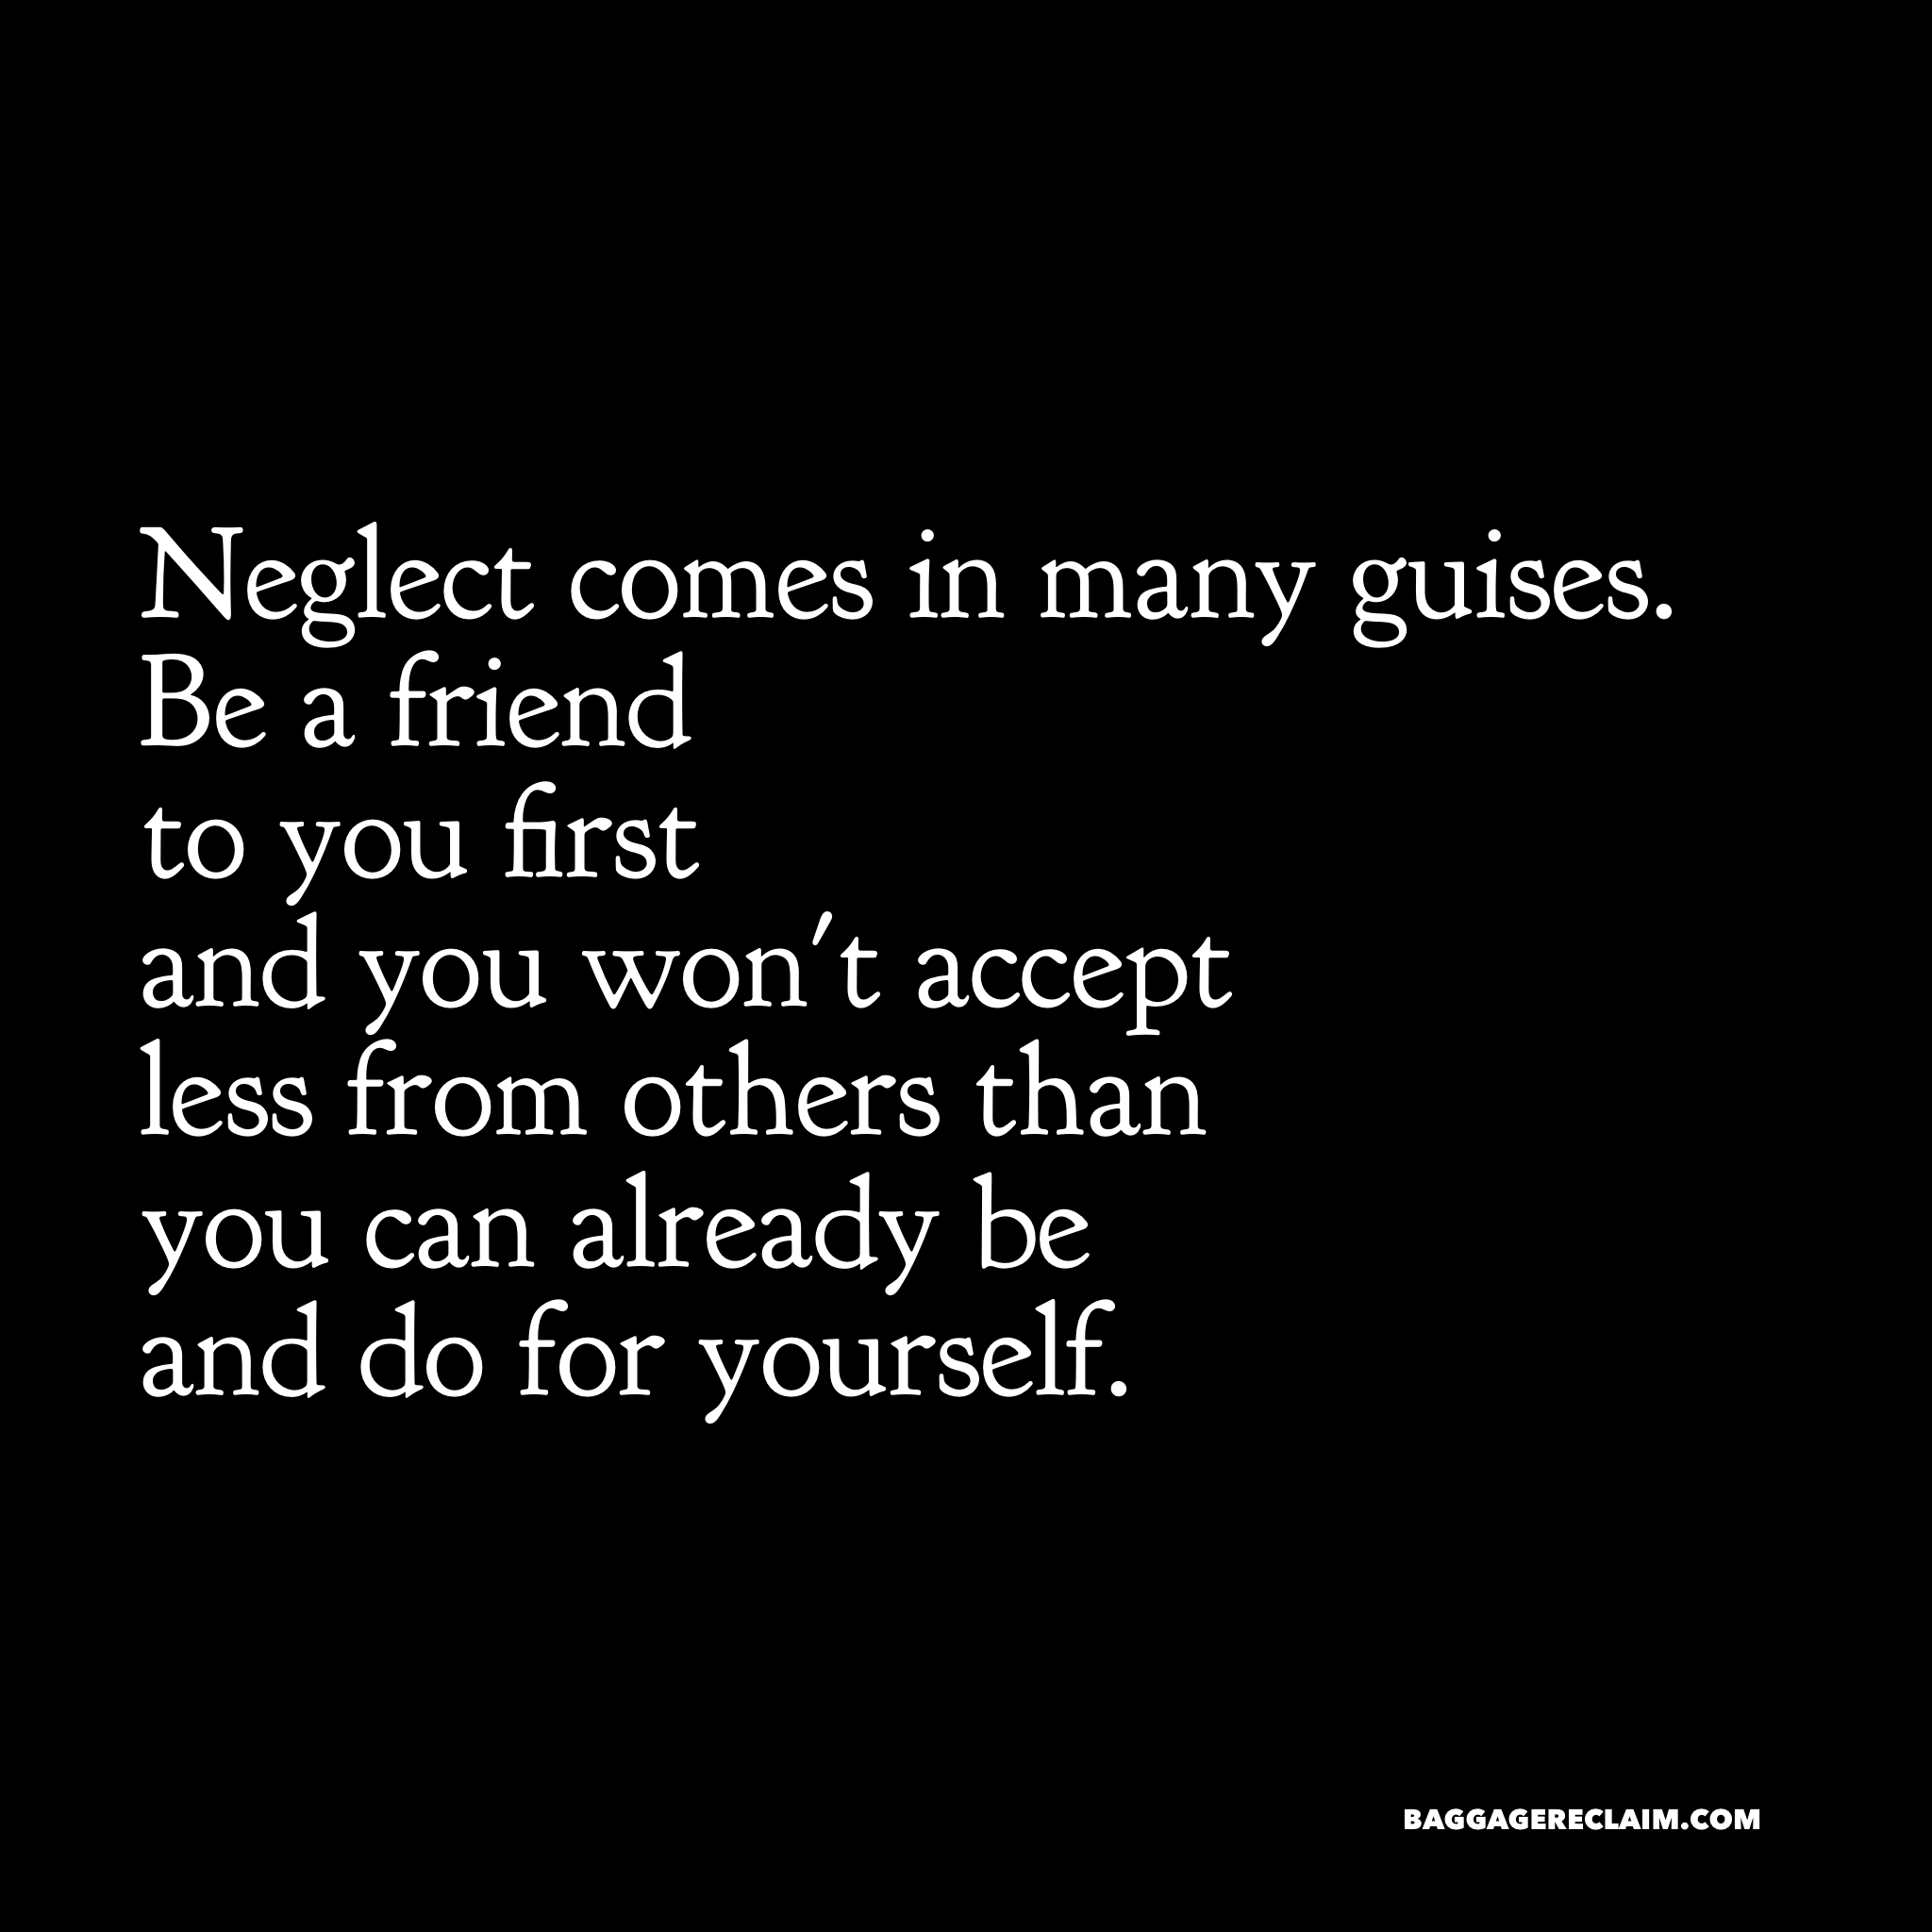 Neglect comes in many guises. Be a friend to you first and you won't accept less from others than you can already be and do for yourself.